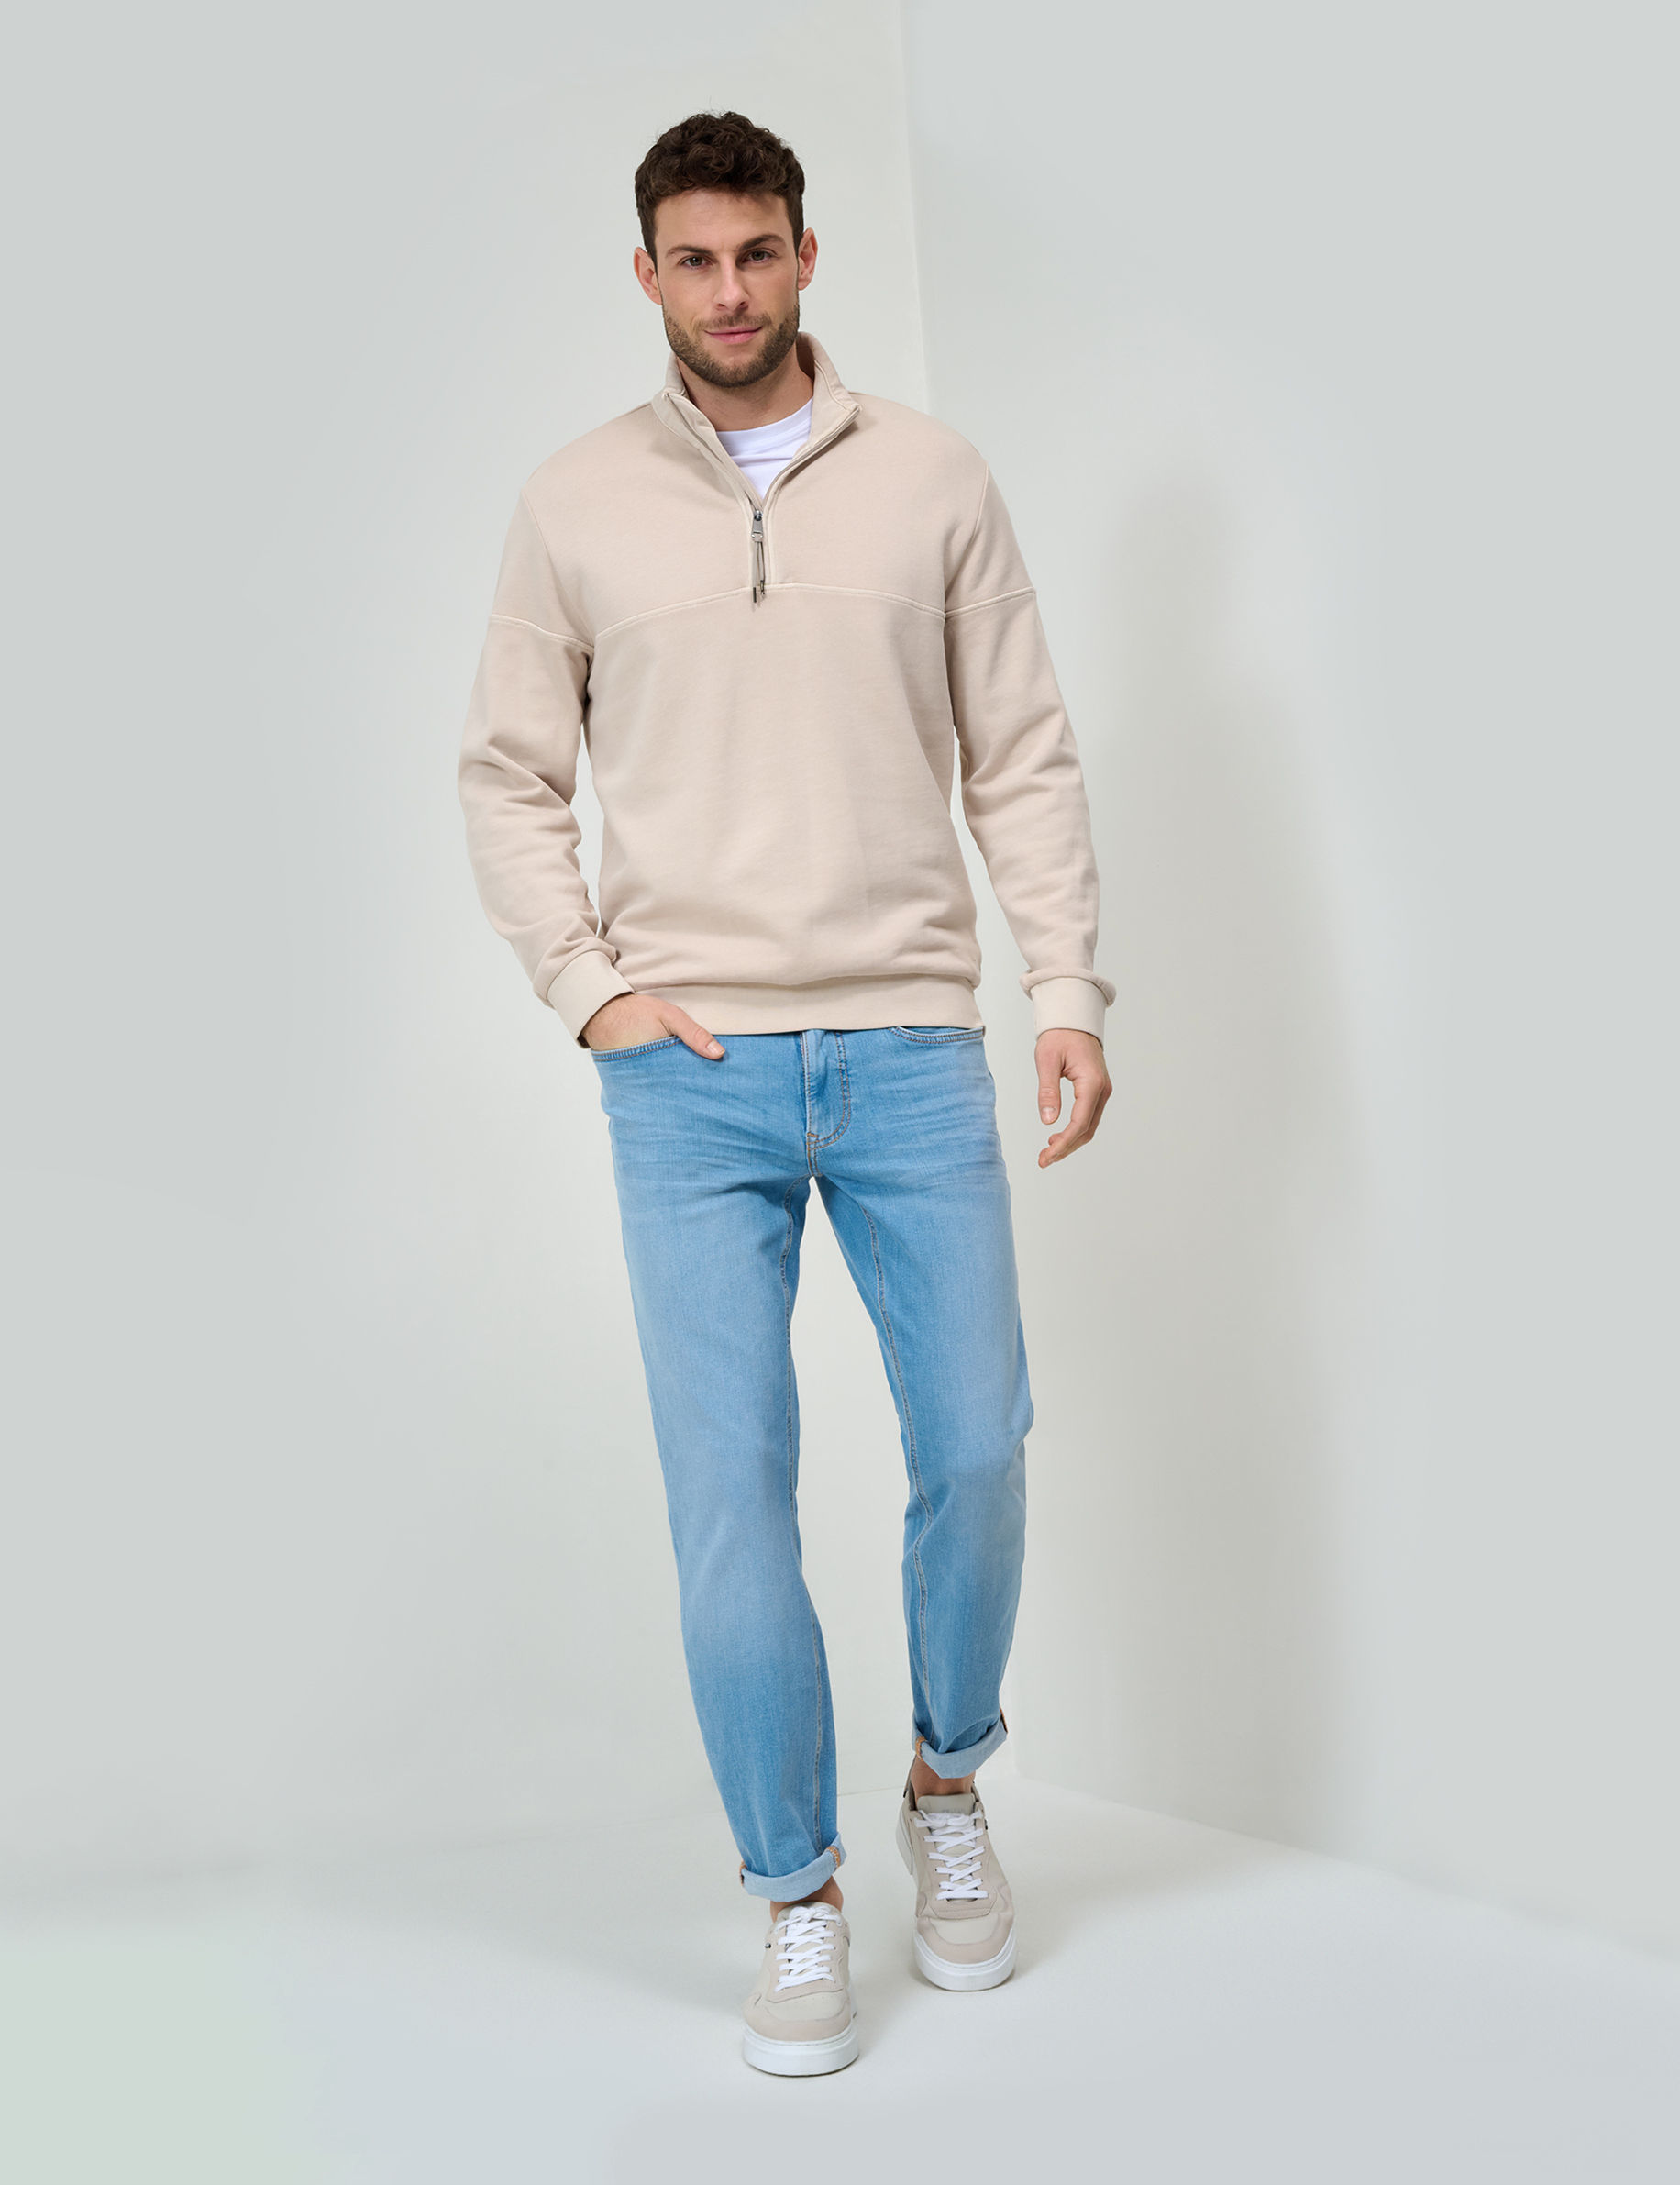 Men Style SION cosy linen  Model Outfit